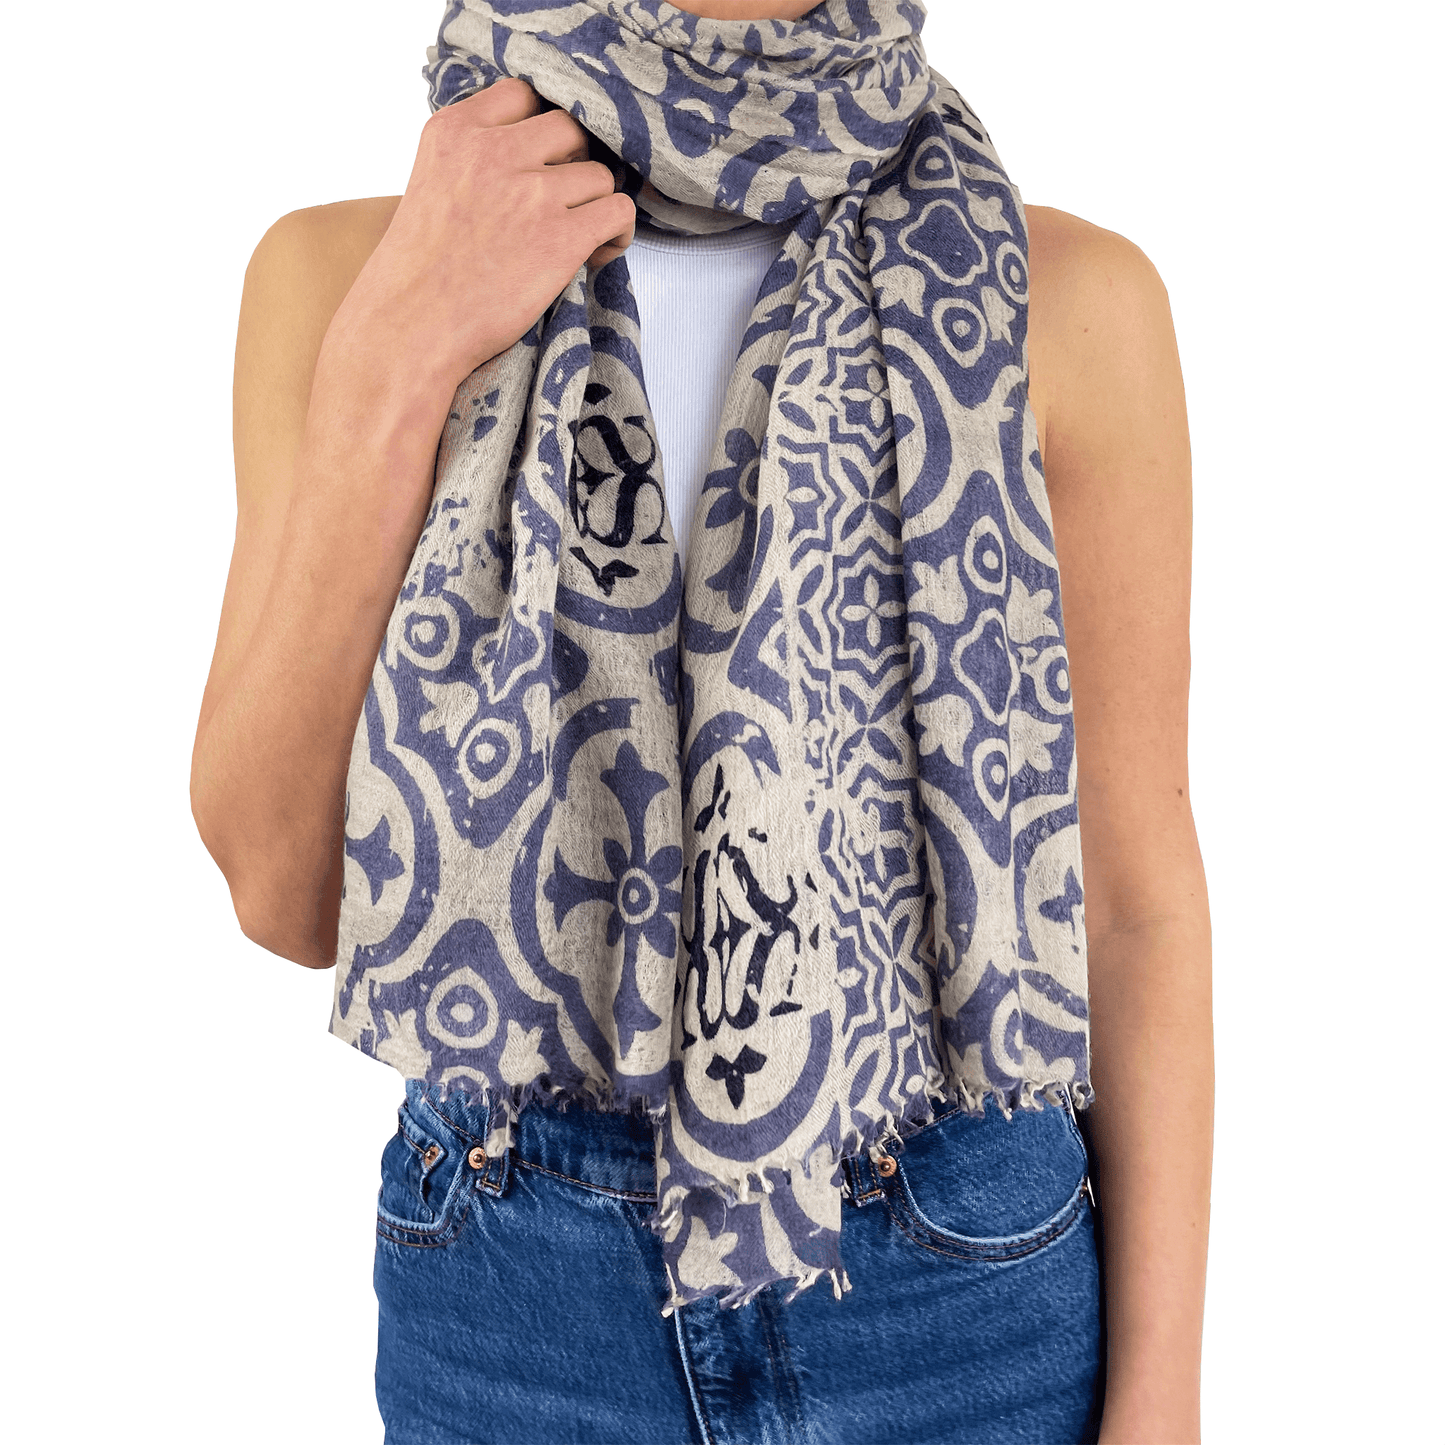 "CANNES" HAND FELTED & HANDPRINTED SCARF – PURPLE